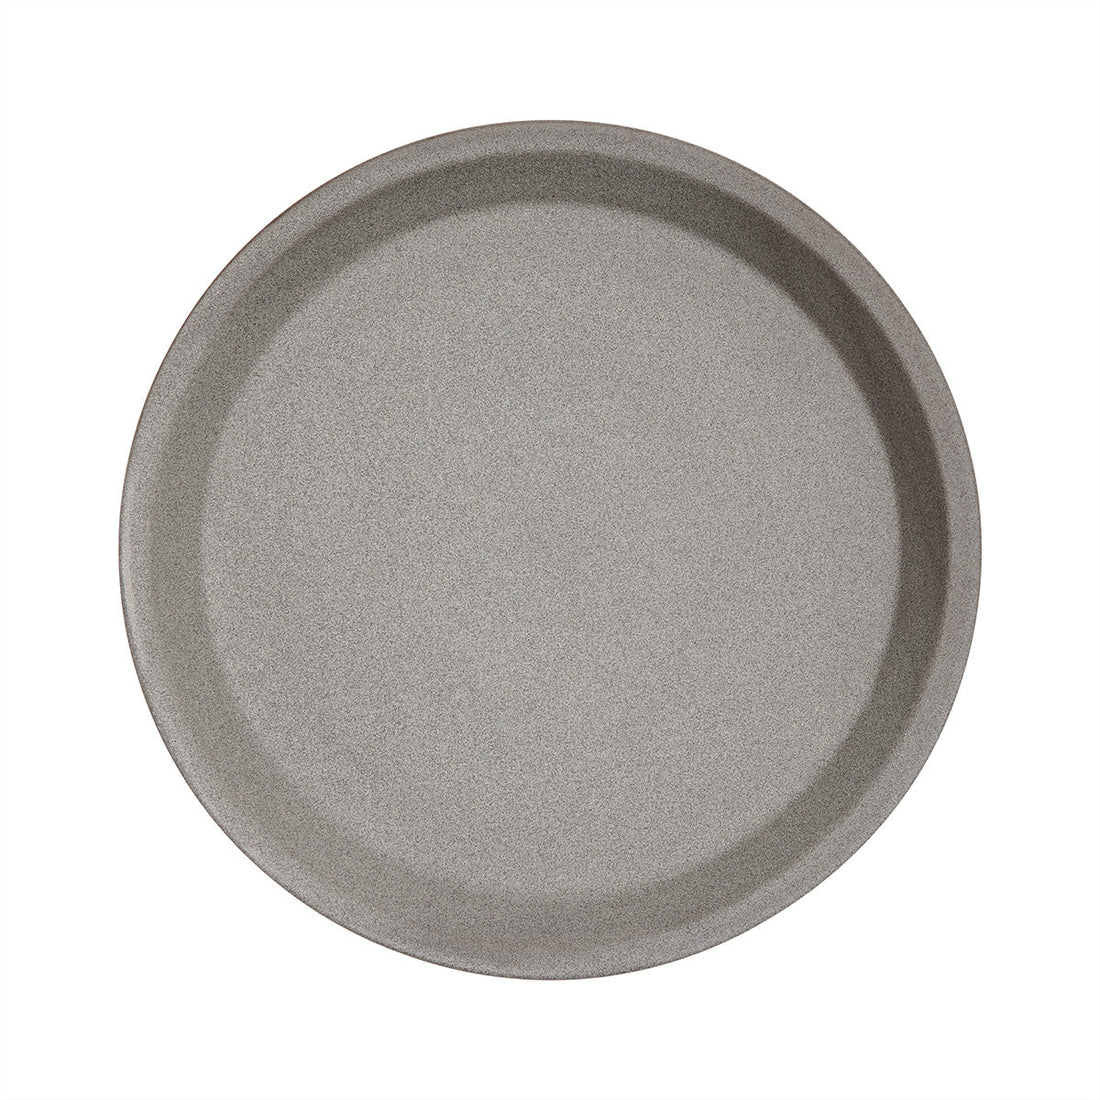 Oyoy Living Yuka Lunch Plate - Pack of 2